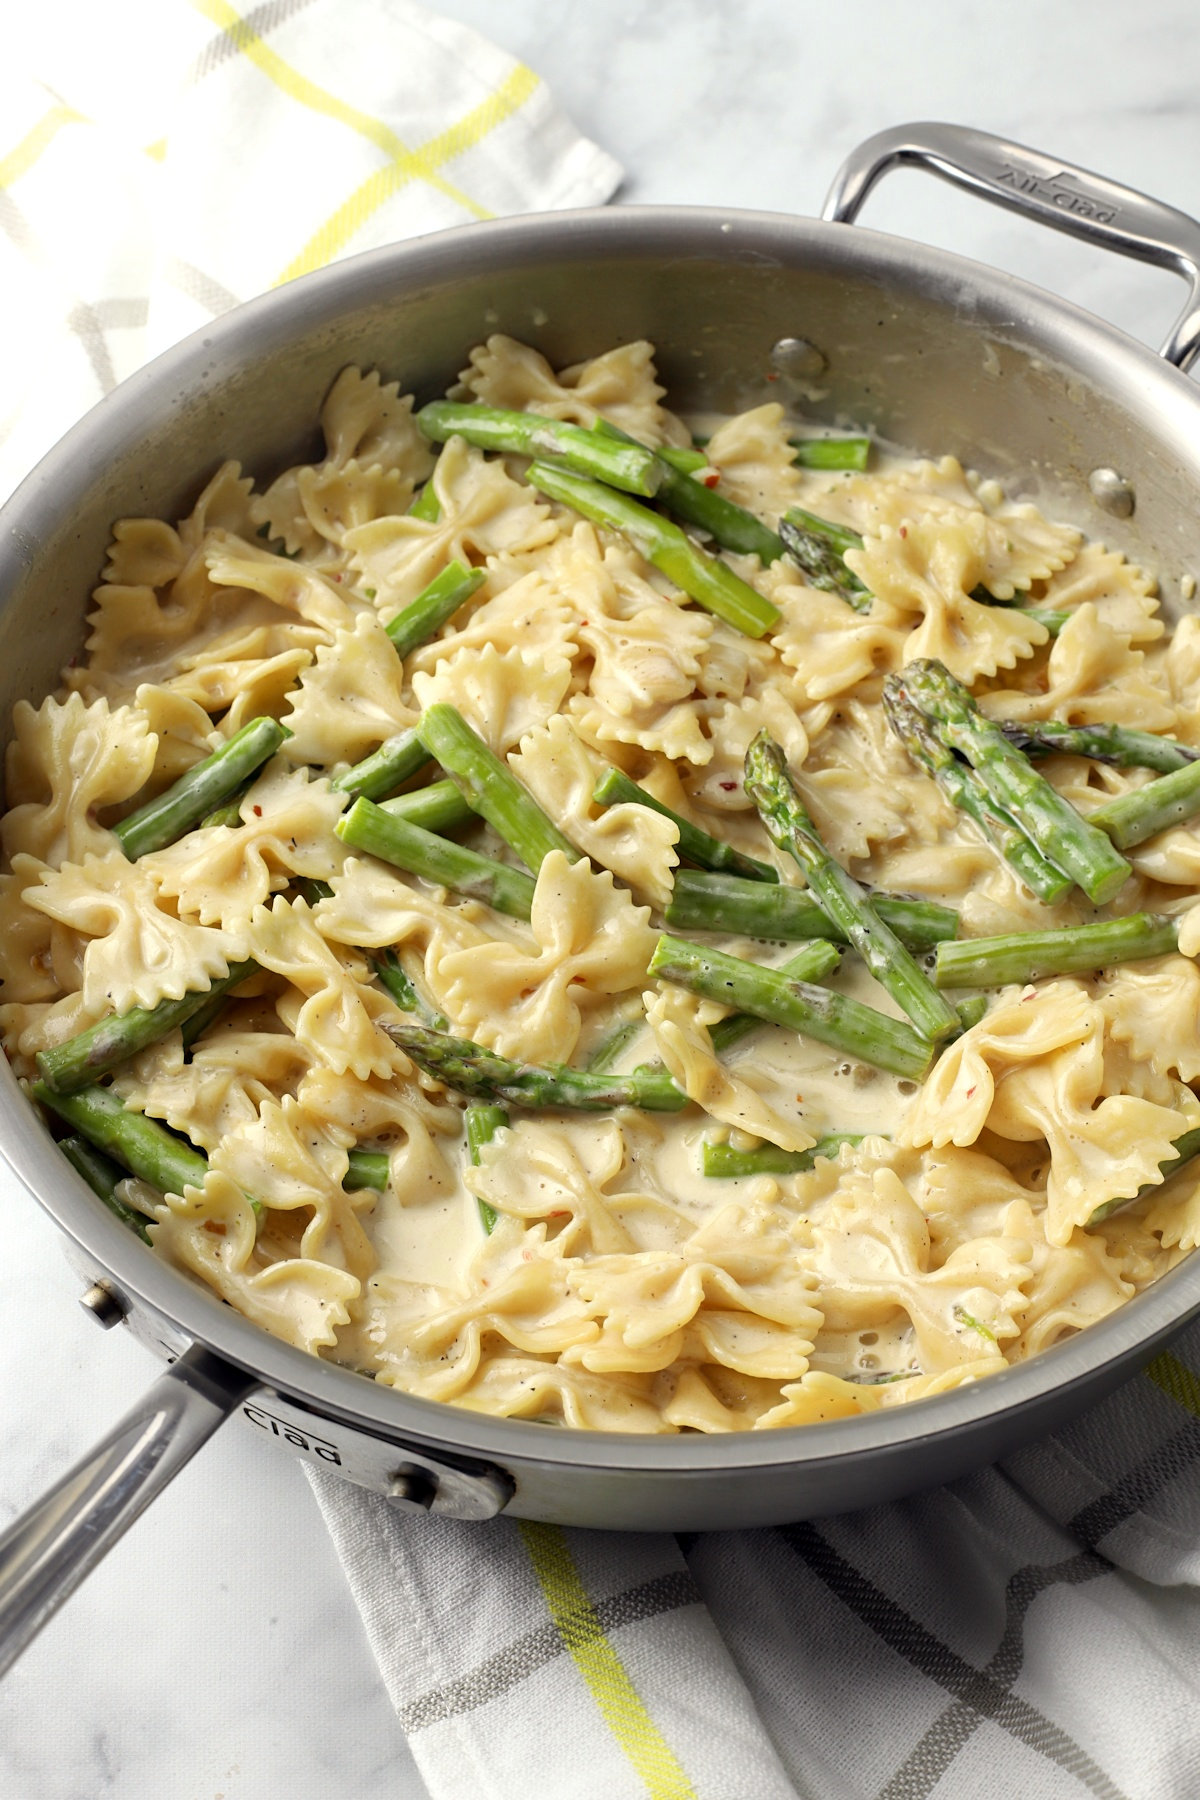 A saute pan filled with bow tie pasta and asparagus.